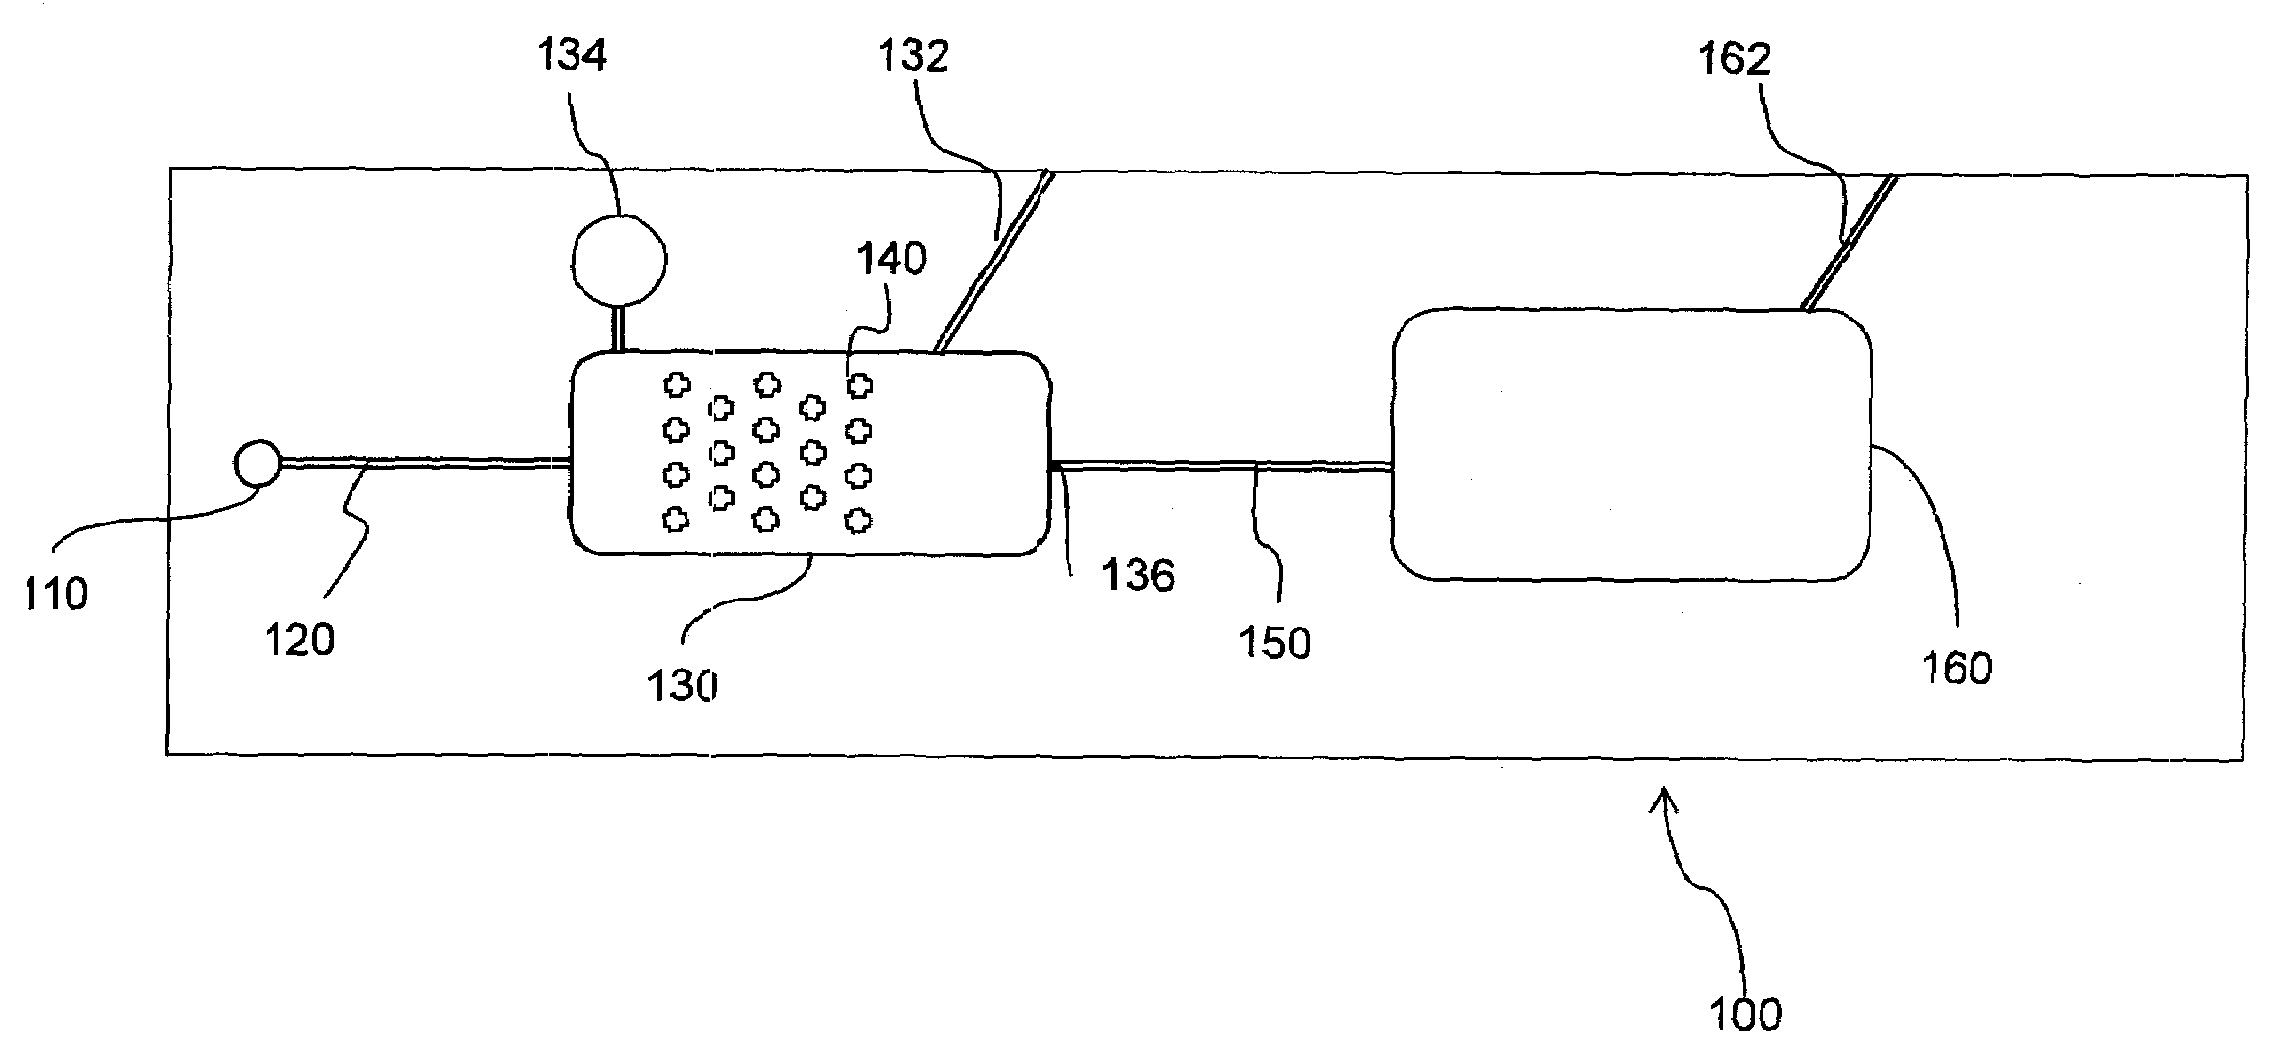 Method and apparatus for entry of specimens into a microfluidic device